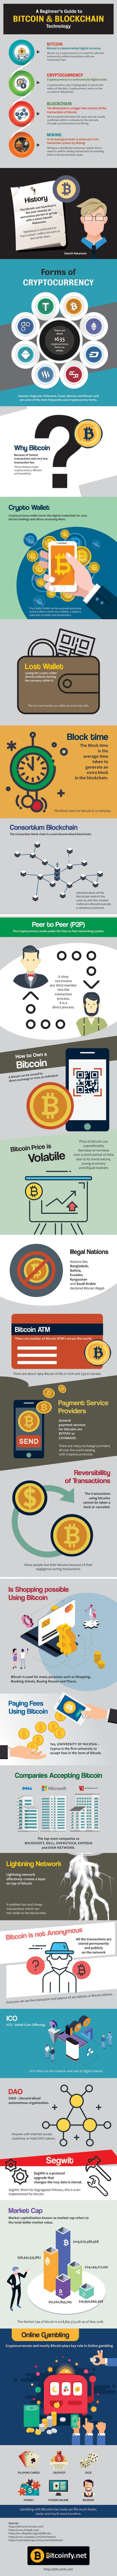 Bitcoin Blockchain Technology Explained for Beginners [Infographic]